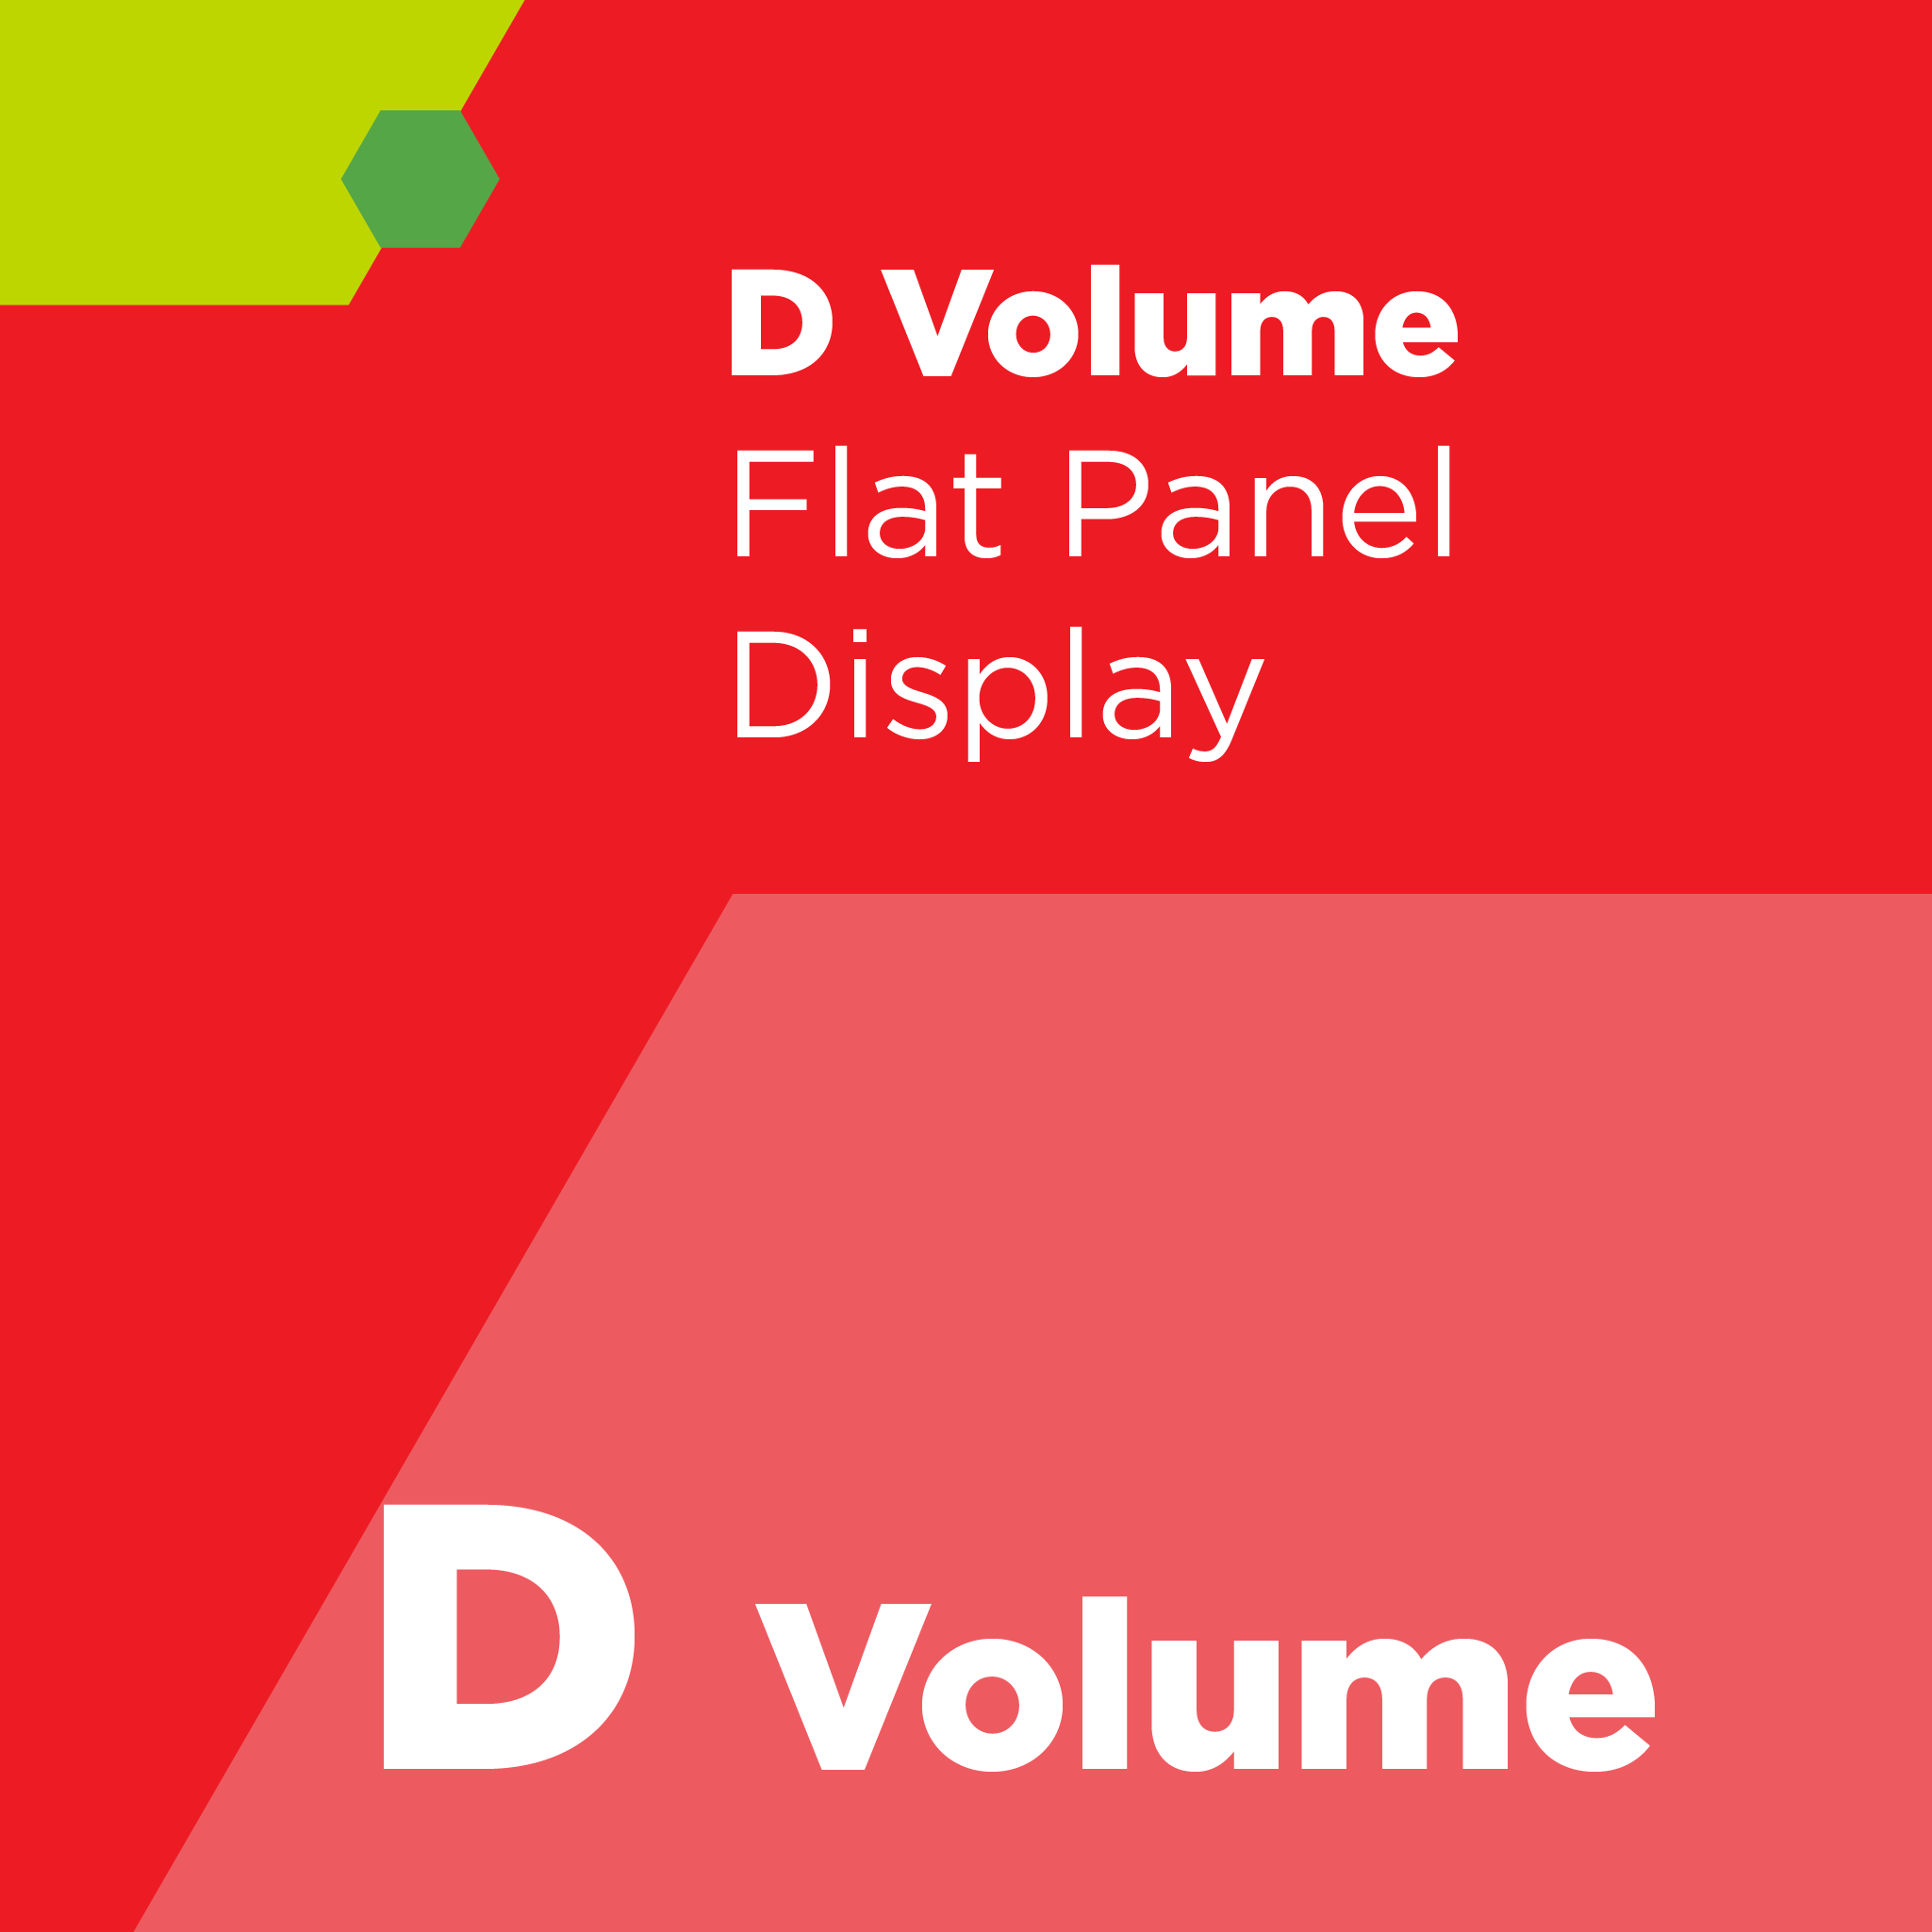 D02400 - SEMI D24 - Specification for Glass Substrates Used to Manufacture Flat Panel Displays